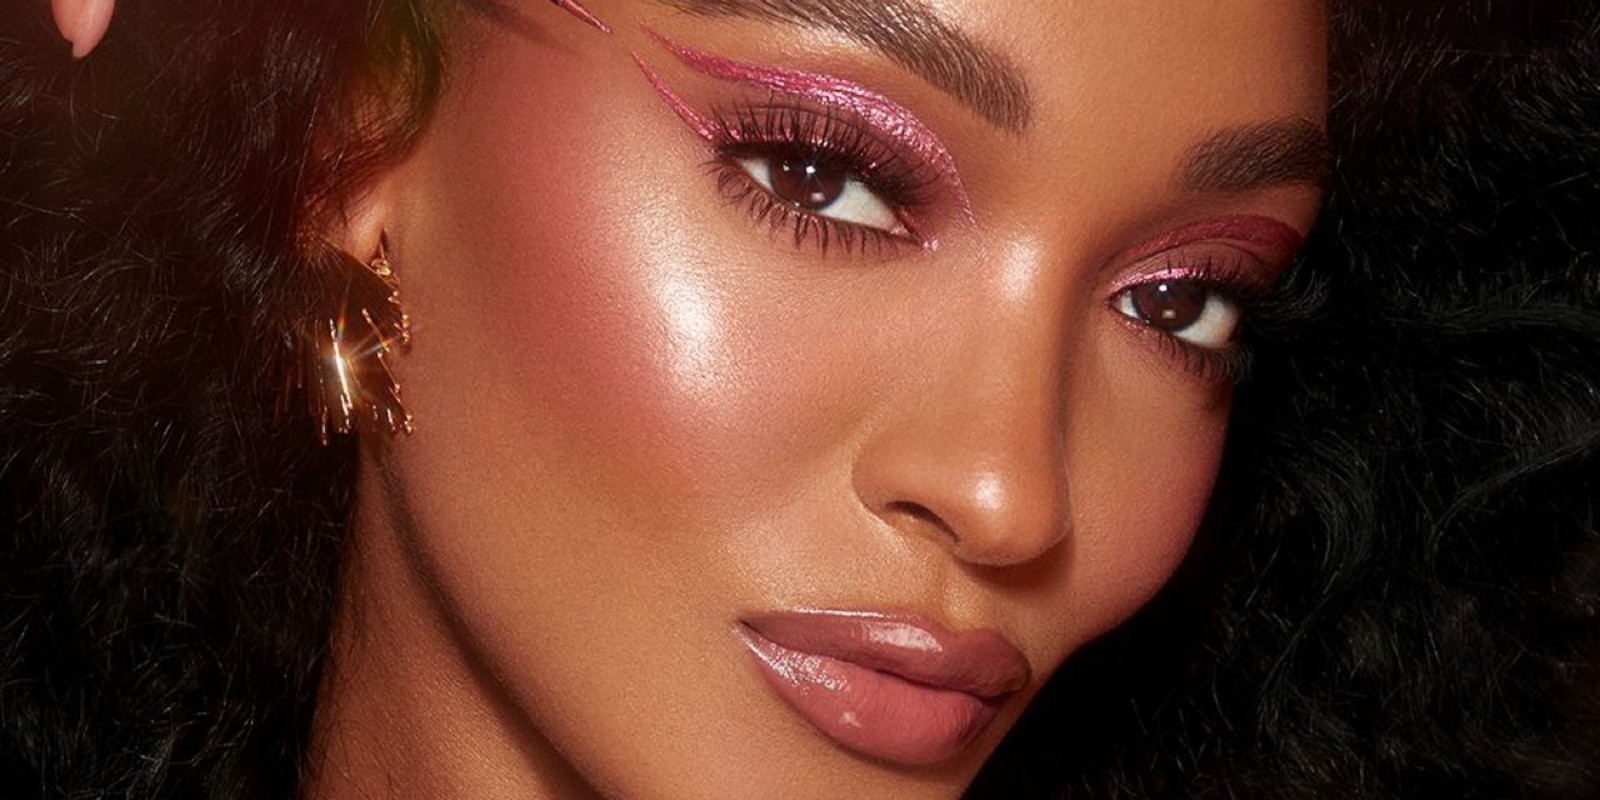 A deep-tone model with brown eyes applying a glittery vivid, rose pink eyeliner while wearing full-glam dewy and glowy pink makeup.